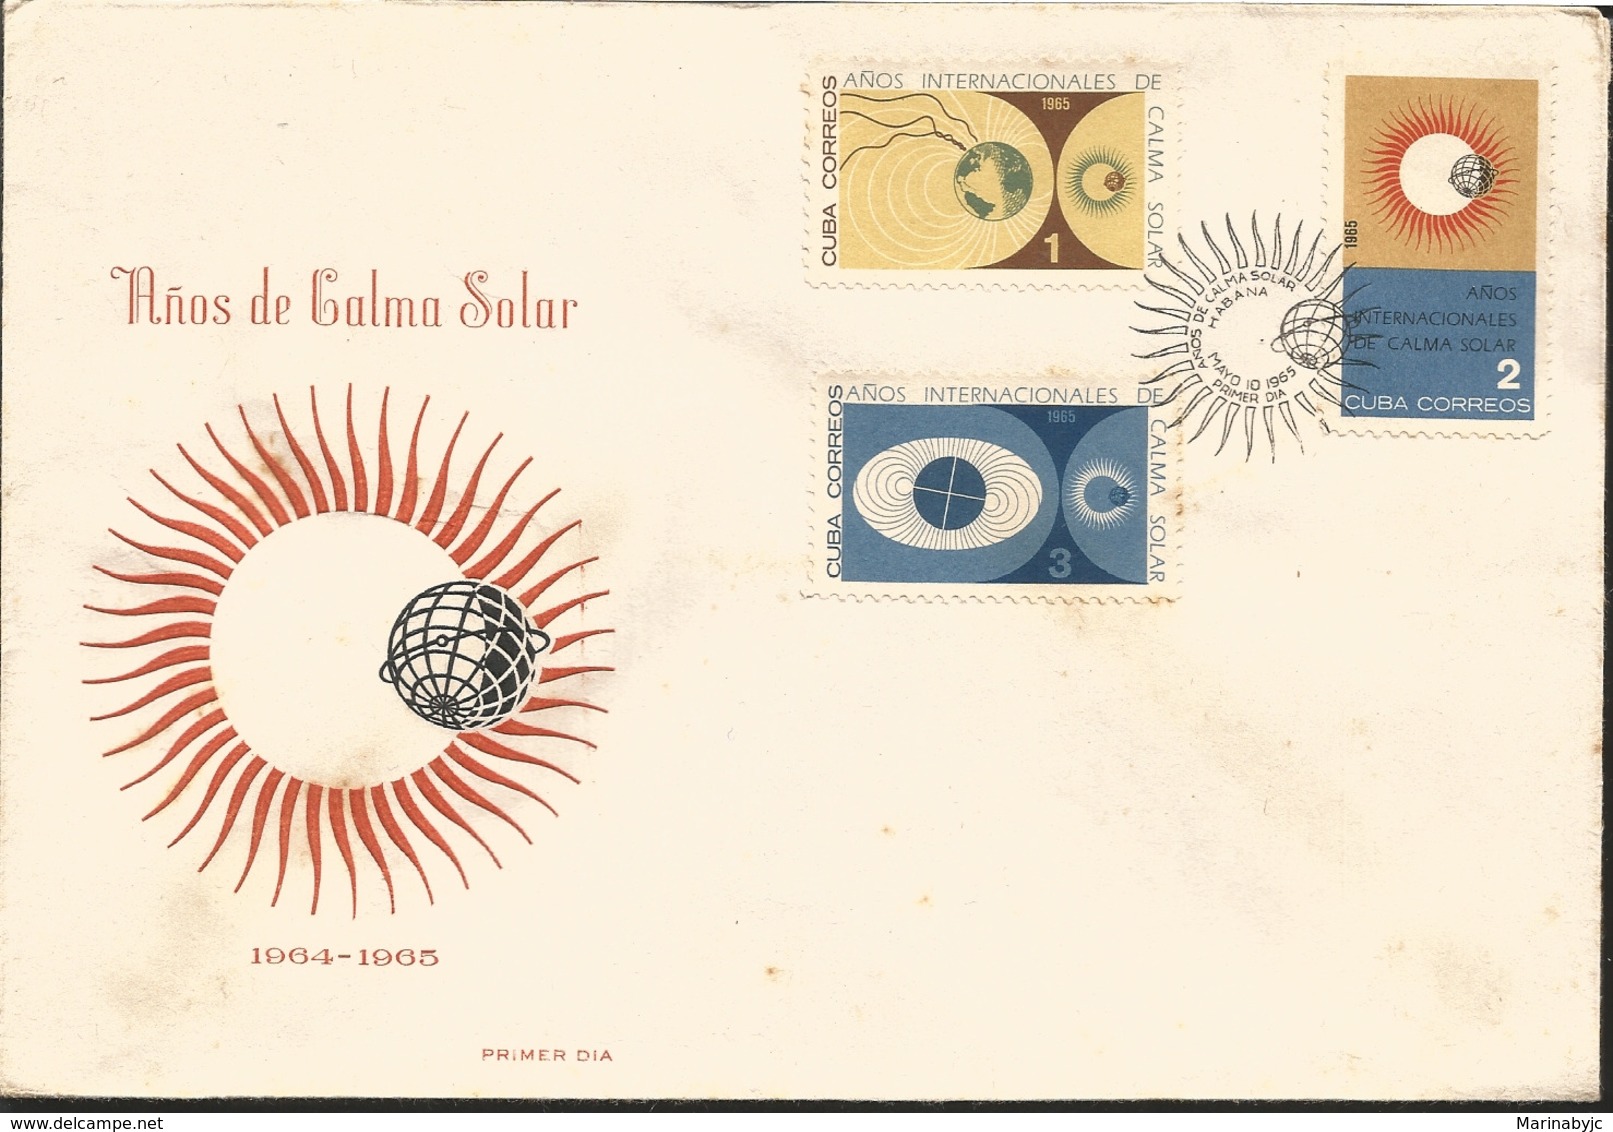 V) 1965 CARIBBEAN, INTERNATIONAL QUIET SUN YEAR, MAGNETIC POLE, SUN, EARTH’S, WITH SLOGAN CANCELATION IN BLACK, FDC - Covers & Documents